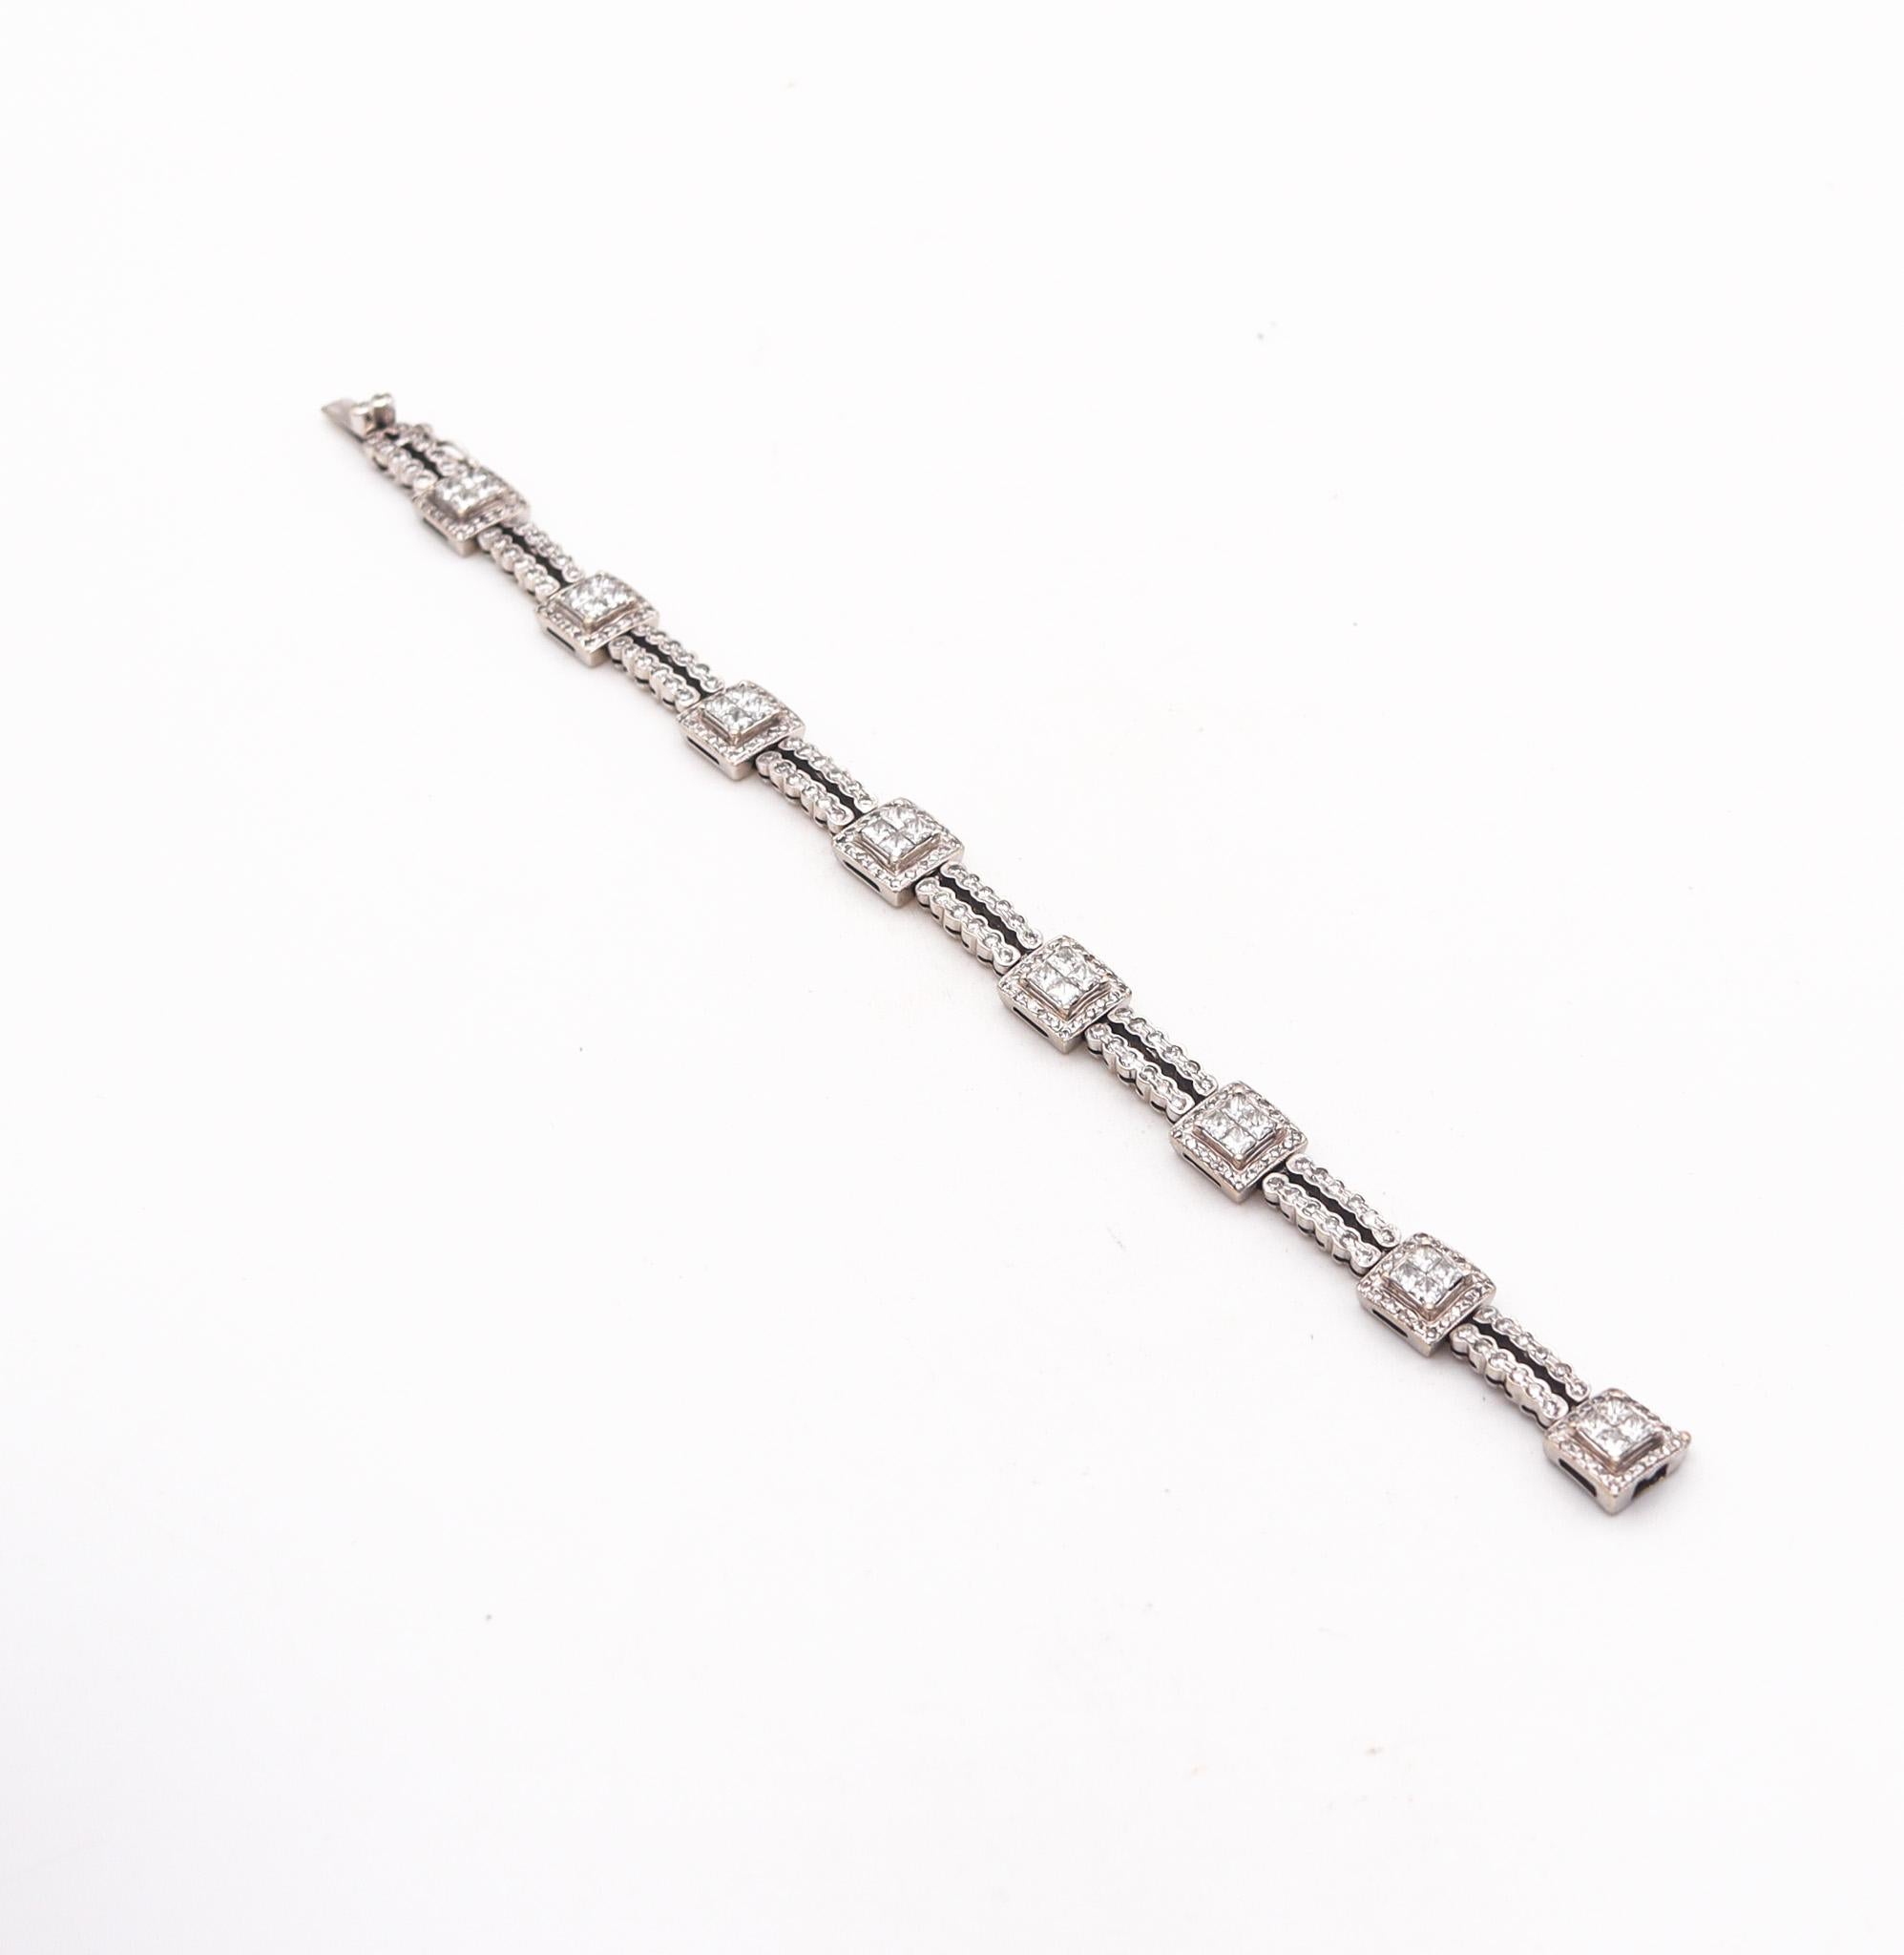 Italian Modernist Station Bracelet In 18Kt White Gold With 7.44 Ctw In Diamonds For Sale 3